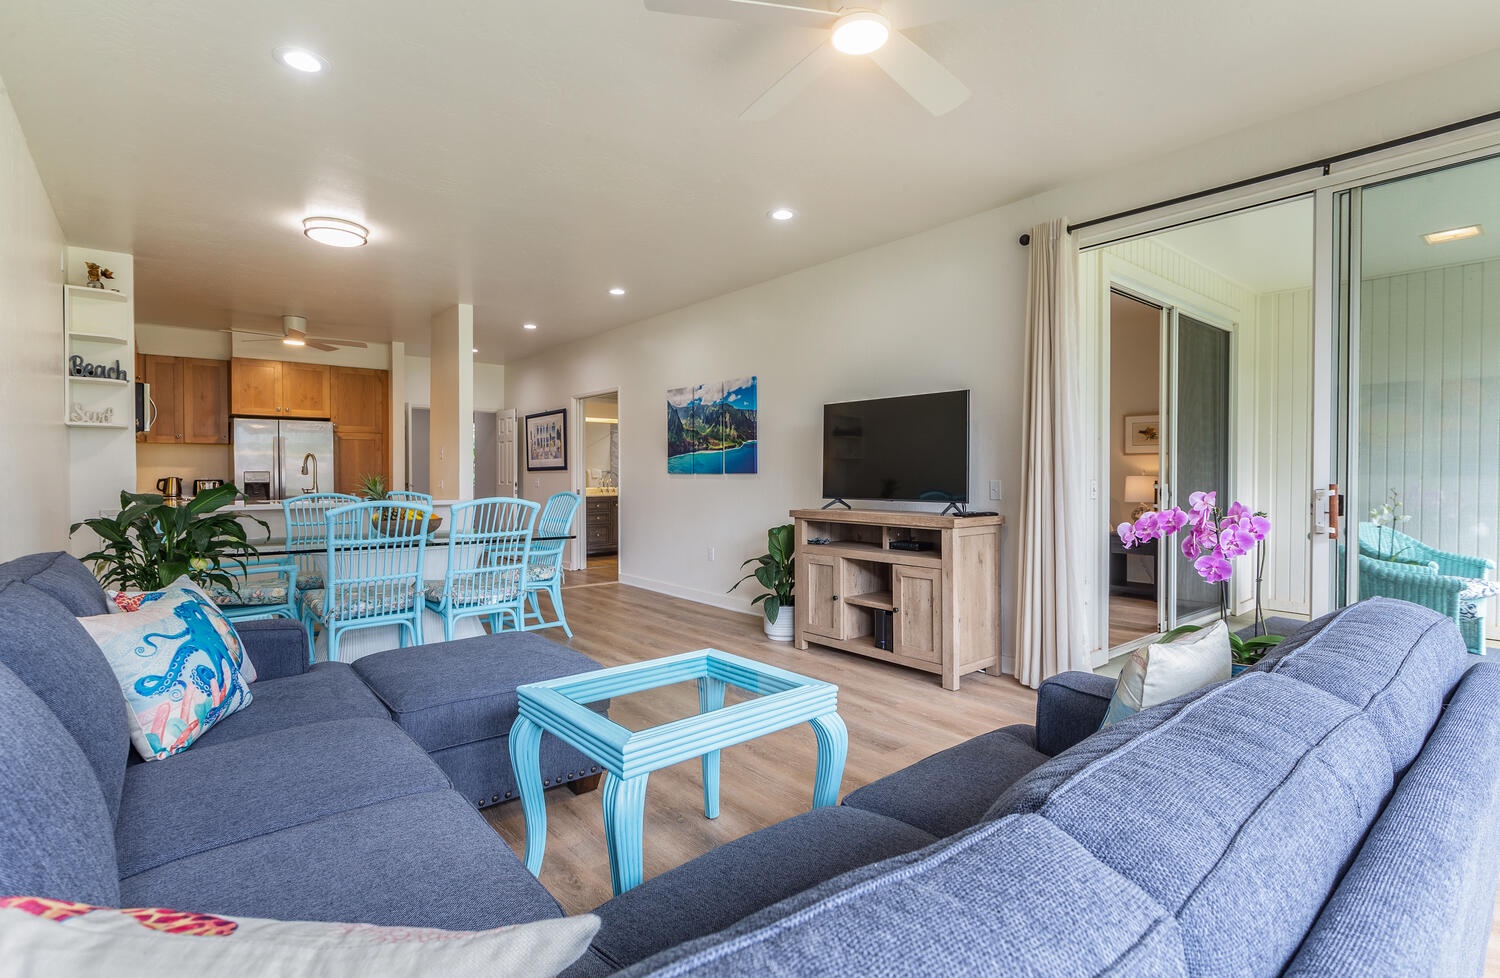 Princeville Vacation Rentals, Emmalani Court 414 - Open-concept living, dining, and kitchen